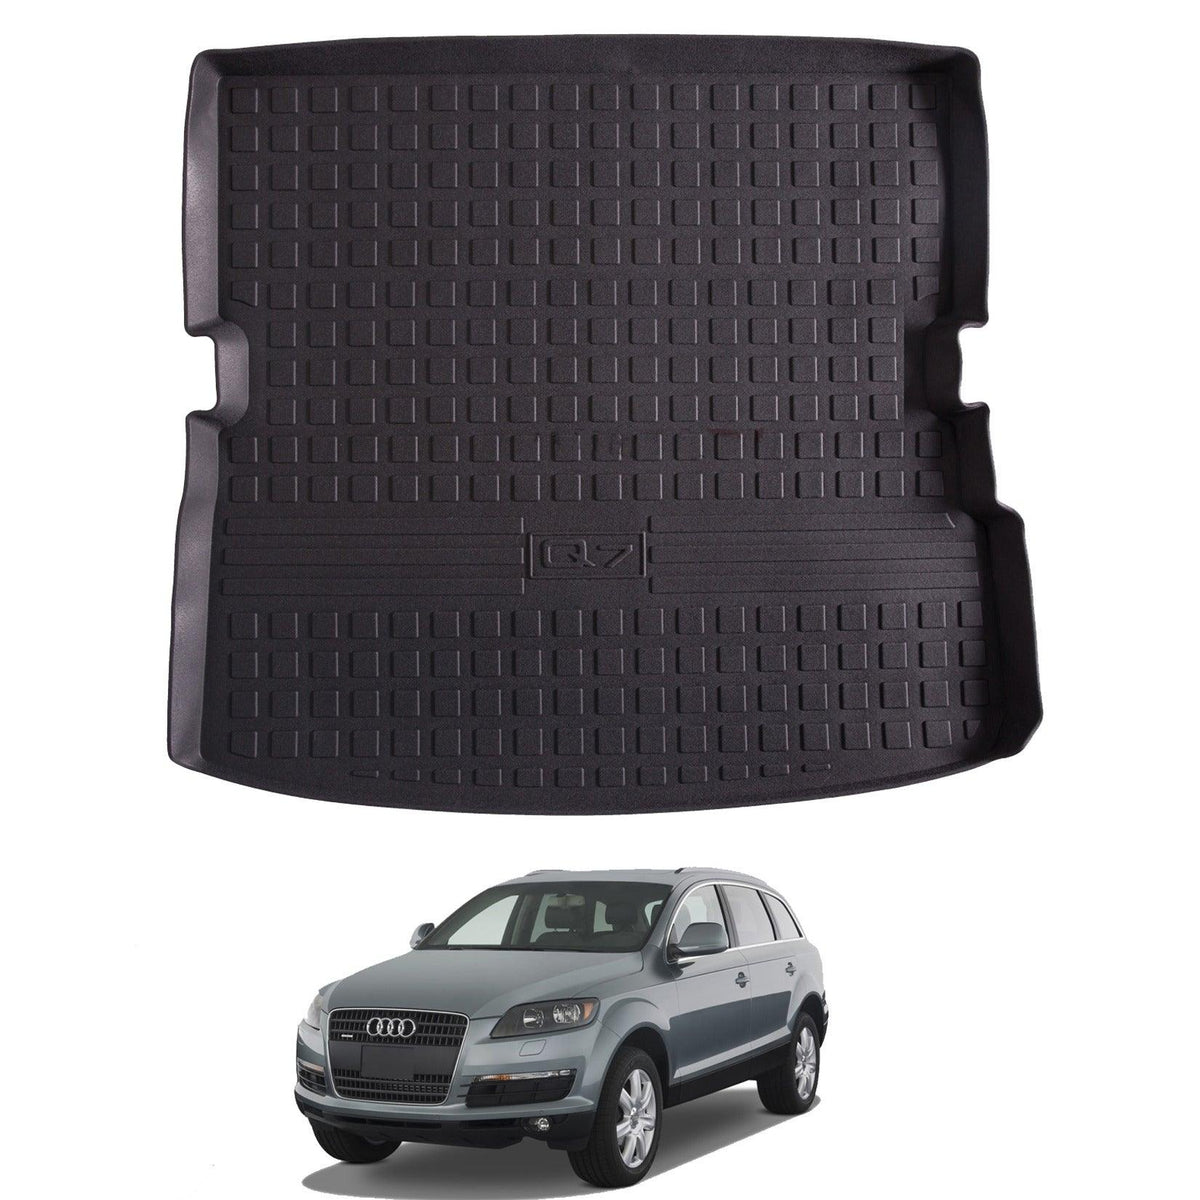 AUDI Q7 2006 - 2010 - STX TAILORED RUBBER BOOT LINER MAT PROTECTOR - Storm Xccessories2